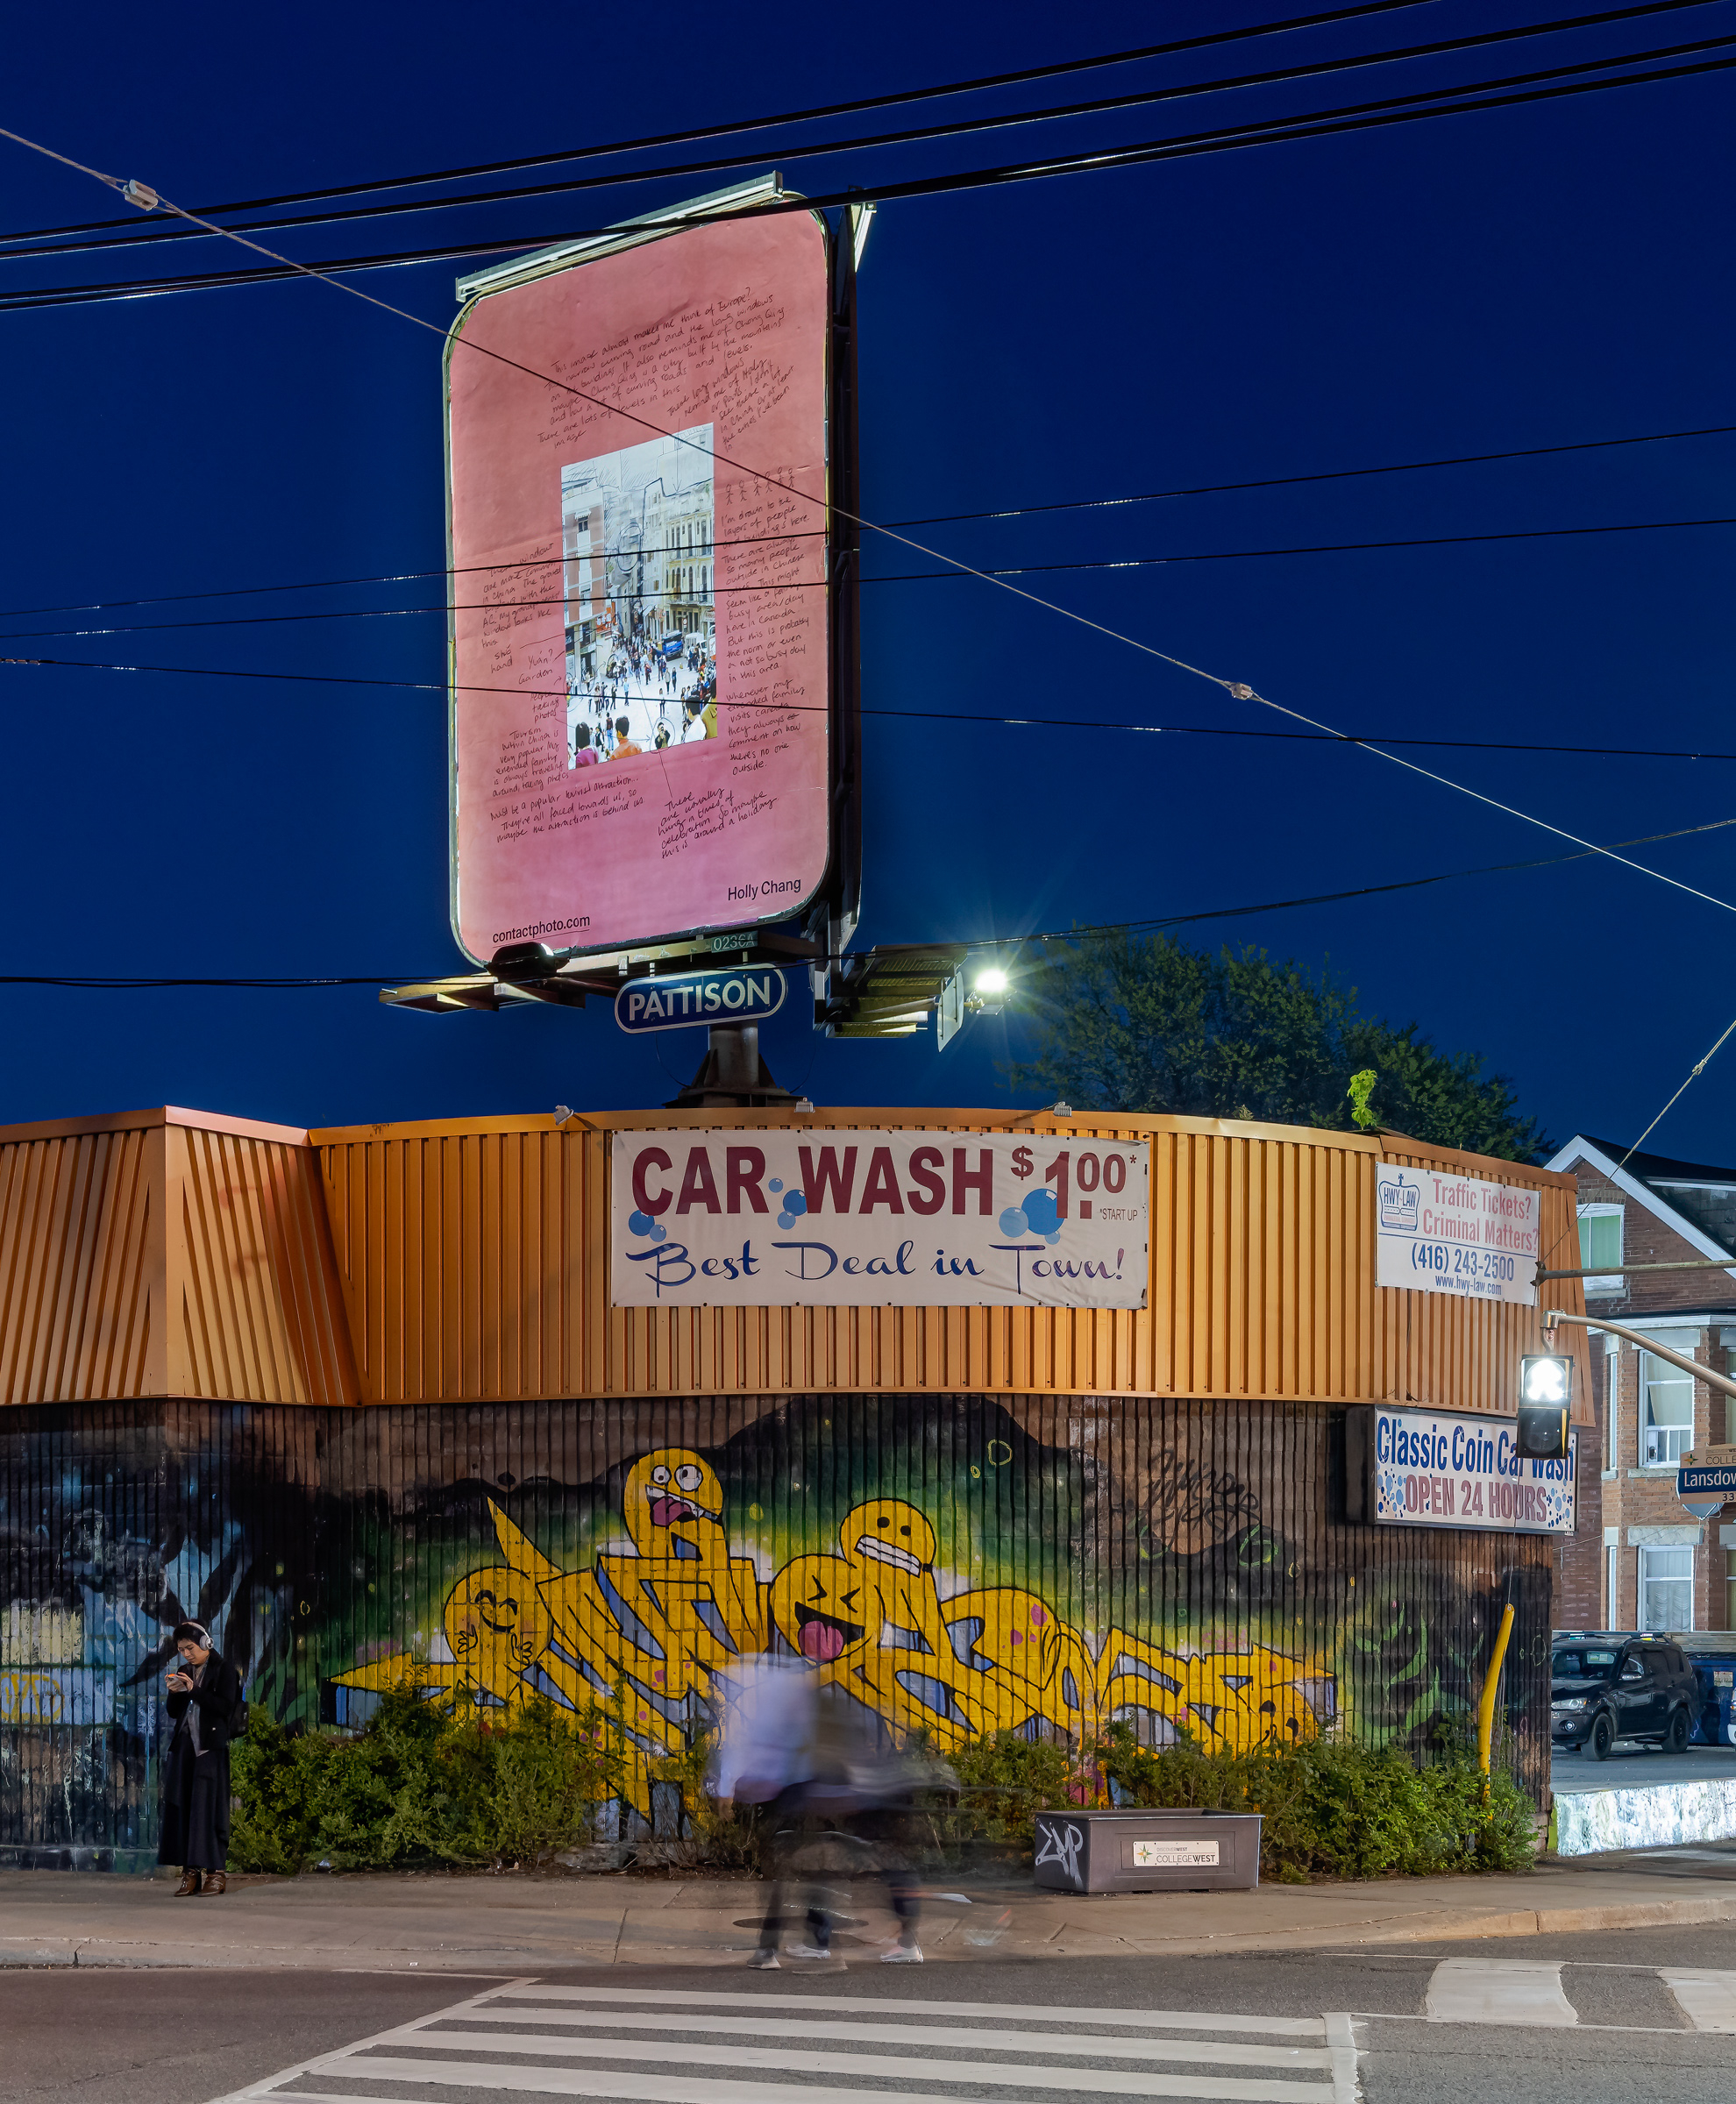     Holly Chang, How to Disappear When No One is Looking, 2024, installation view, billboards at Lansdowne Ave and College St, Courtesy of the artist and CONTACT Photography Festival. Photo: Toni Hafkenscheid

